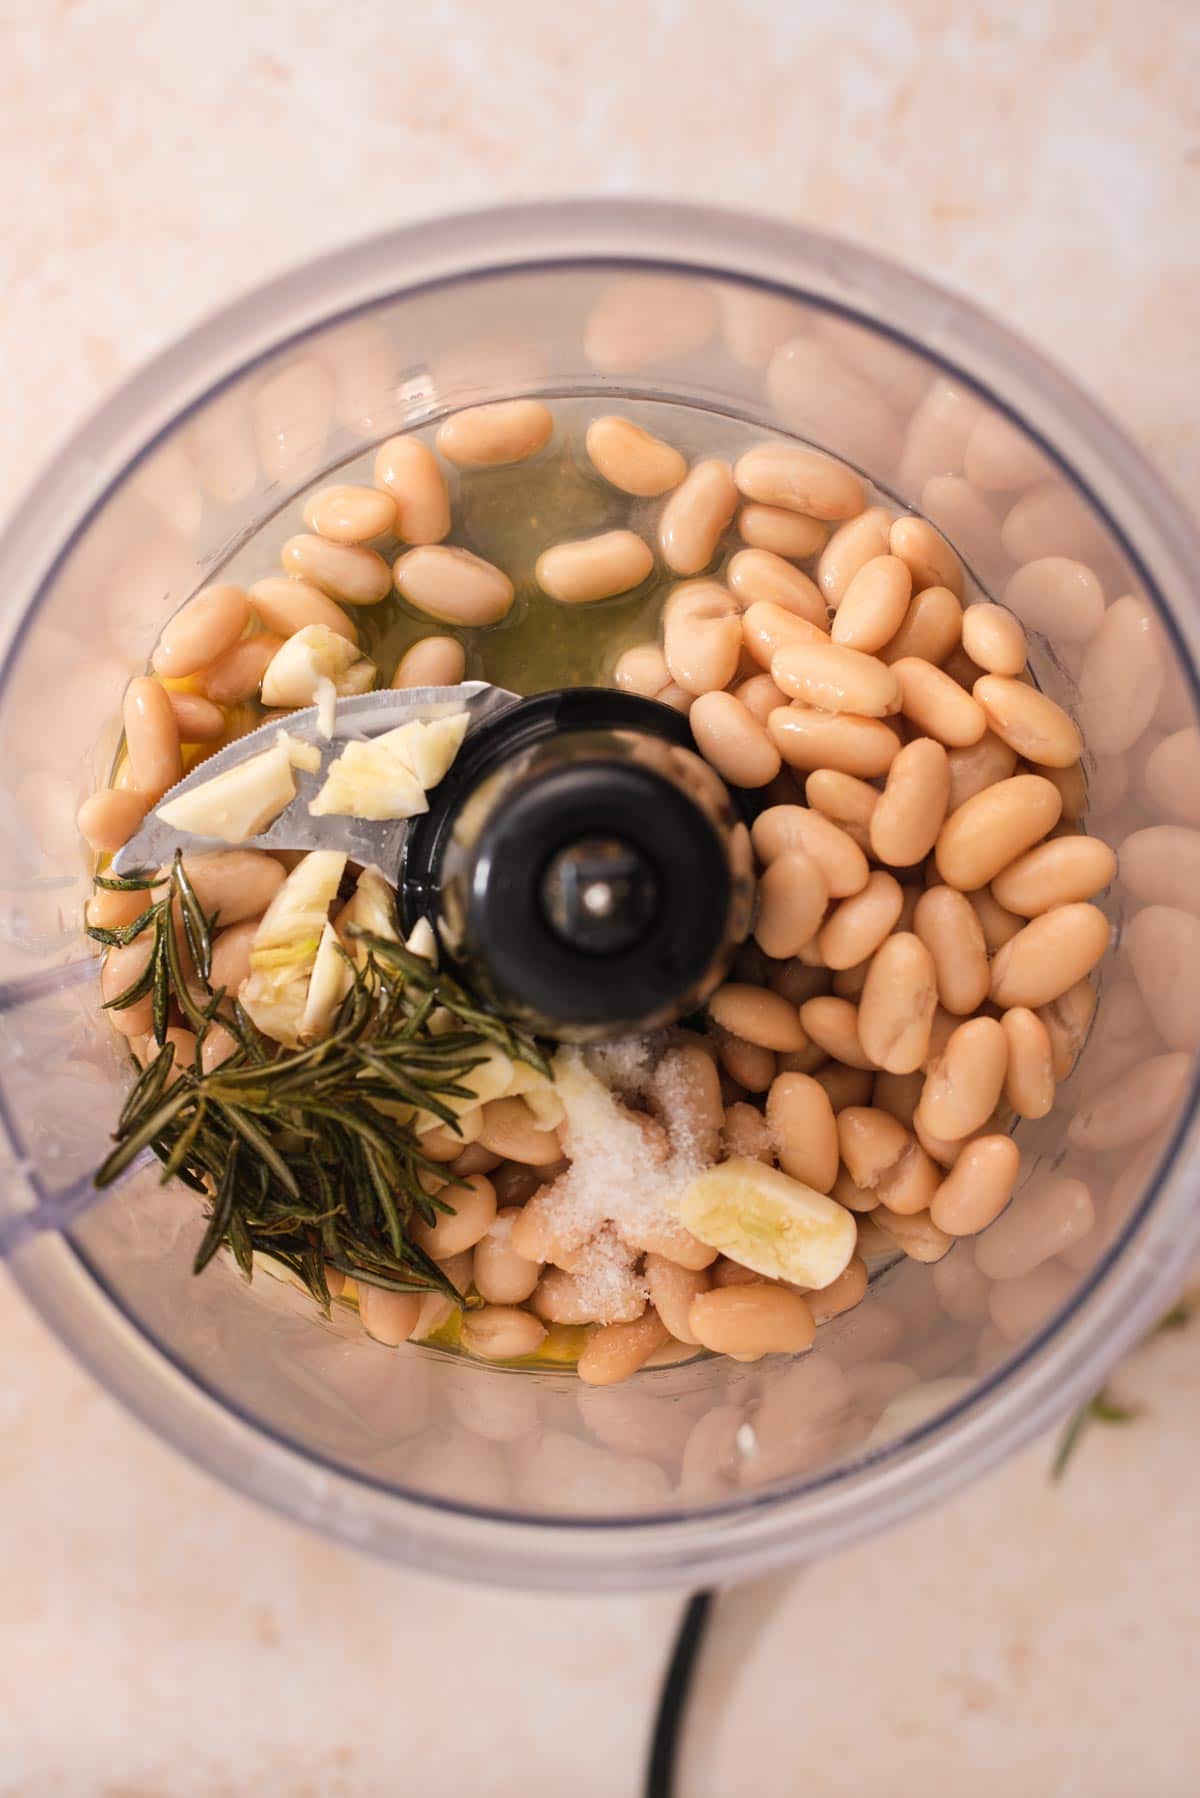 Overhead view of food processor filled with white beans, rosemary and garlic